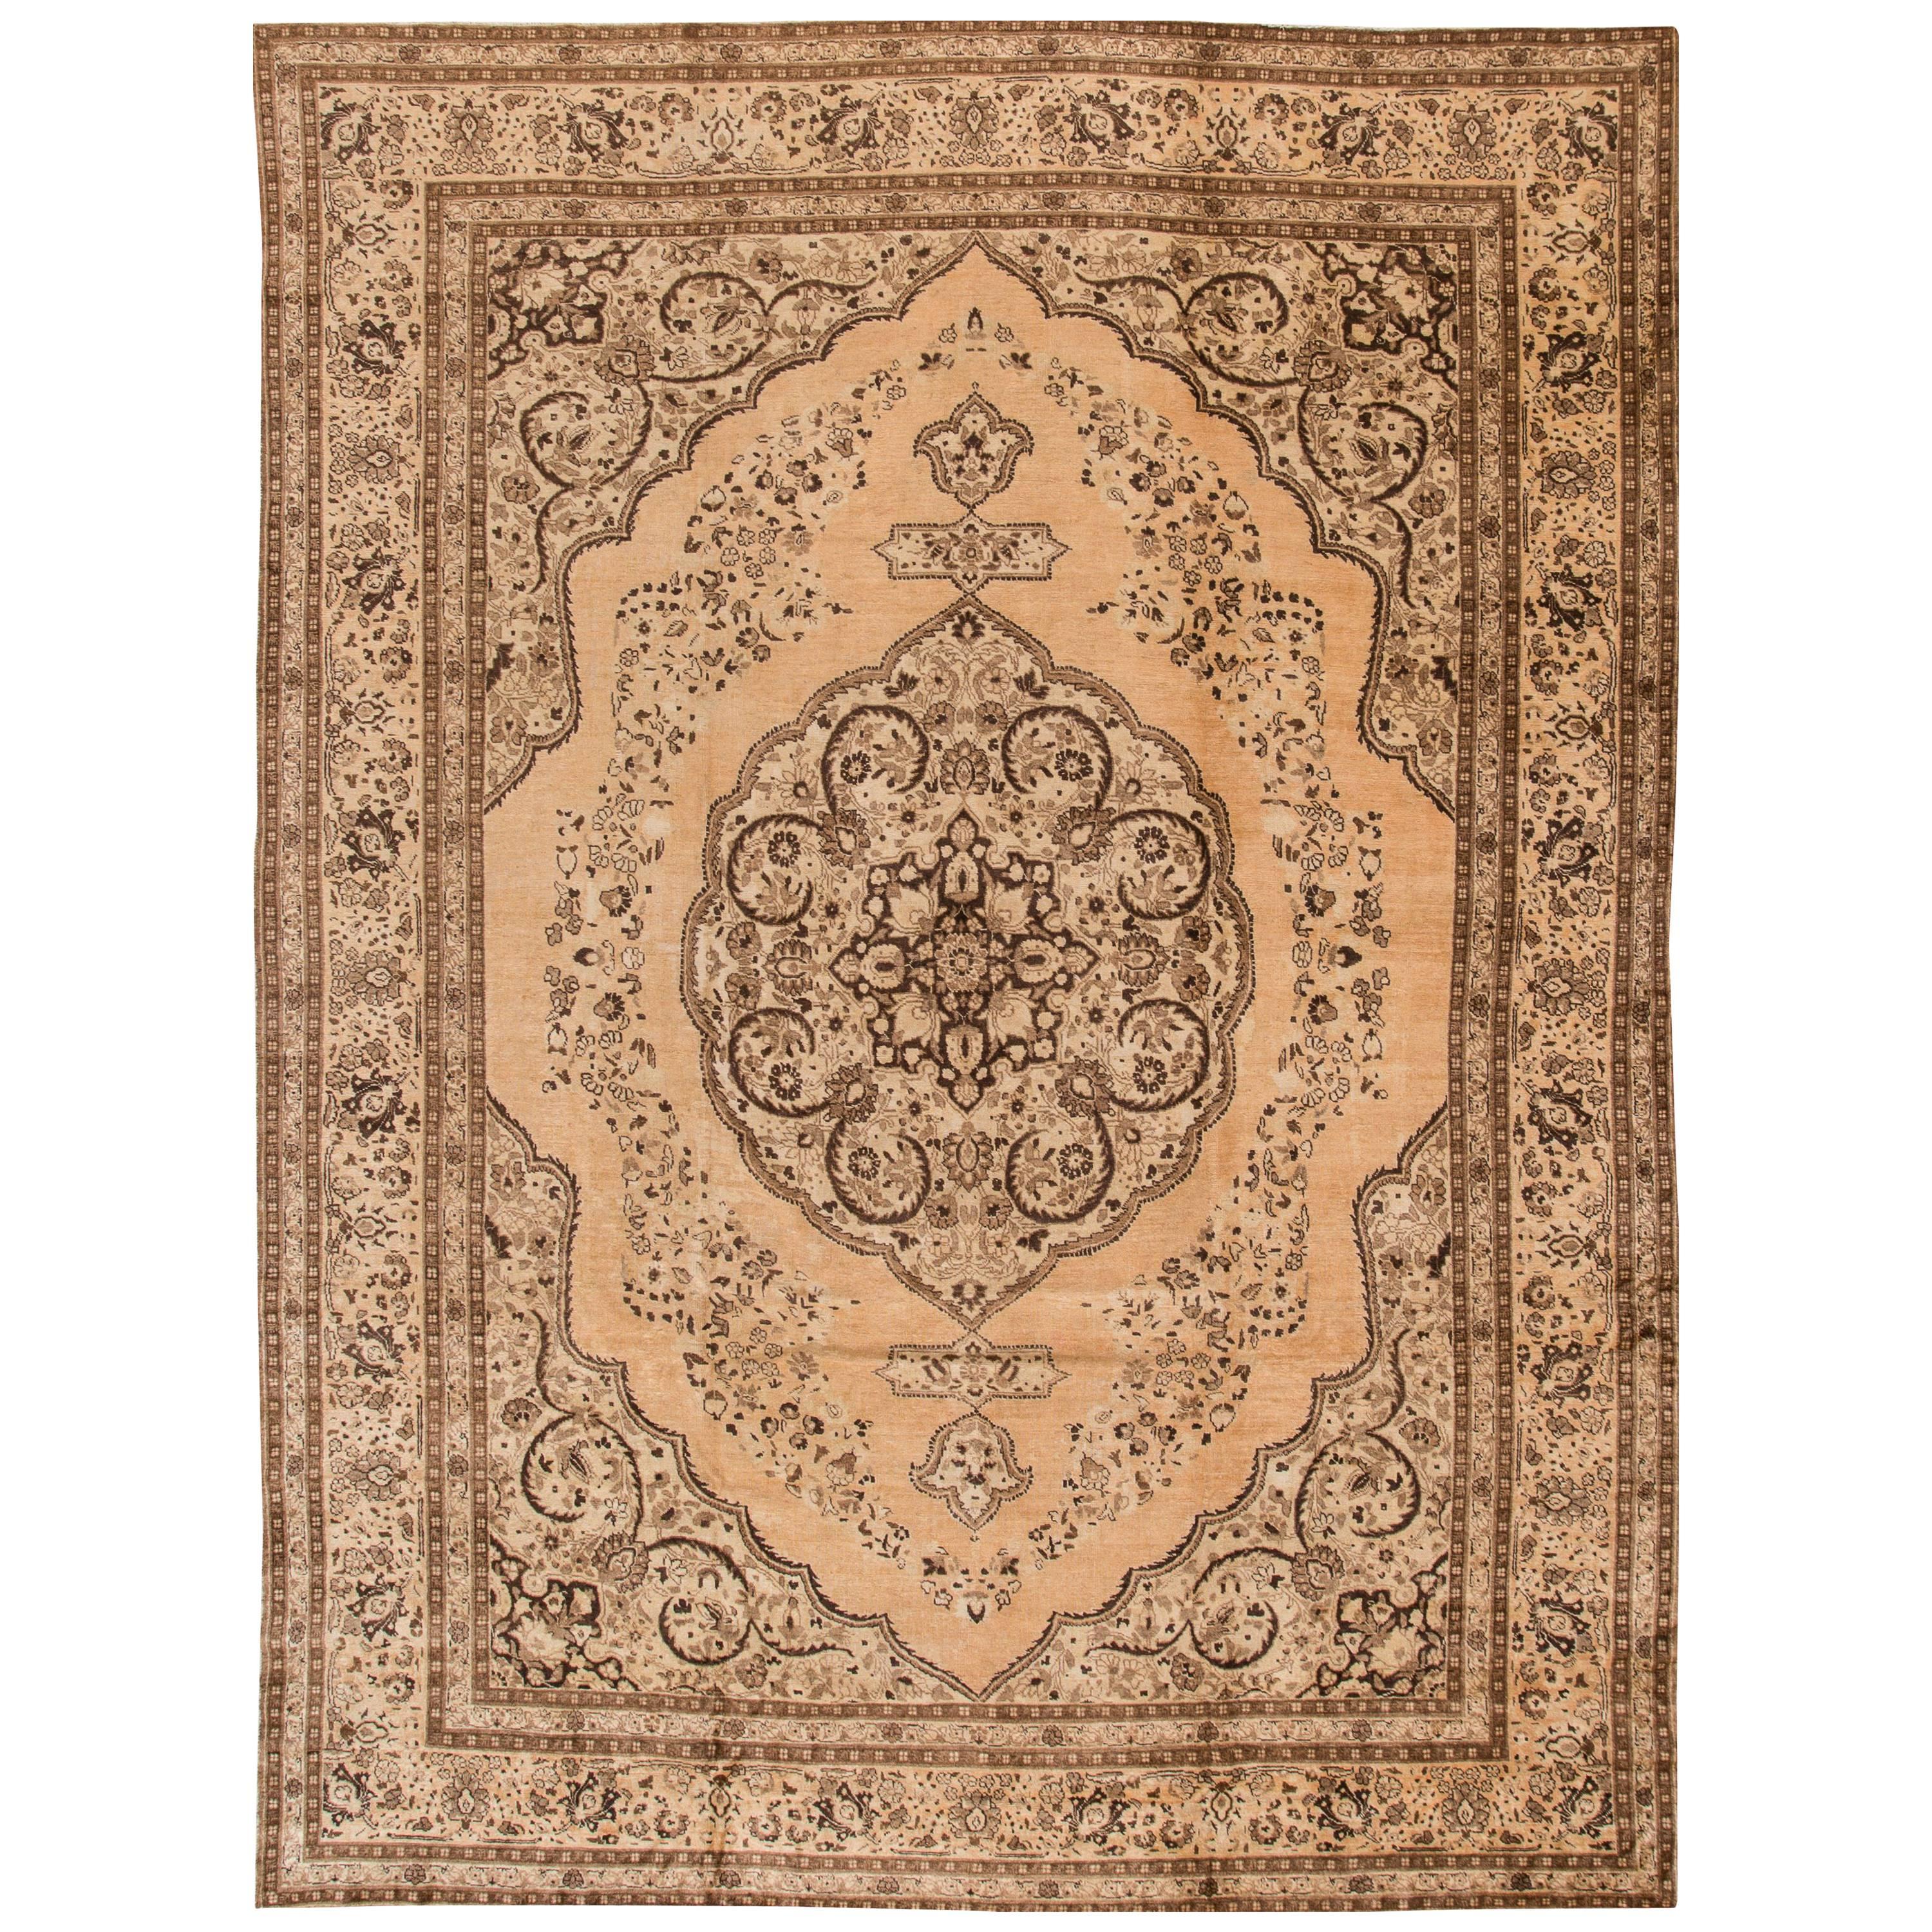 Great Looking Antique Persian Tabriz Rug For Sale